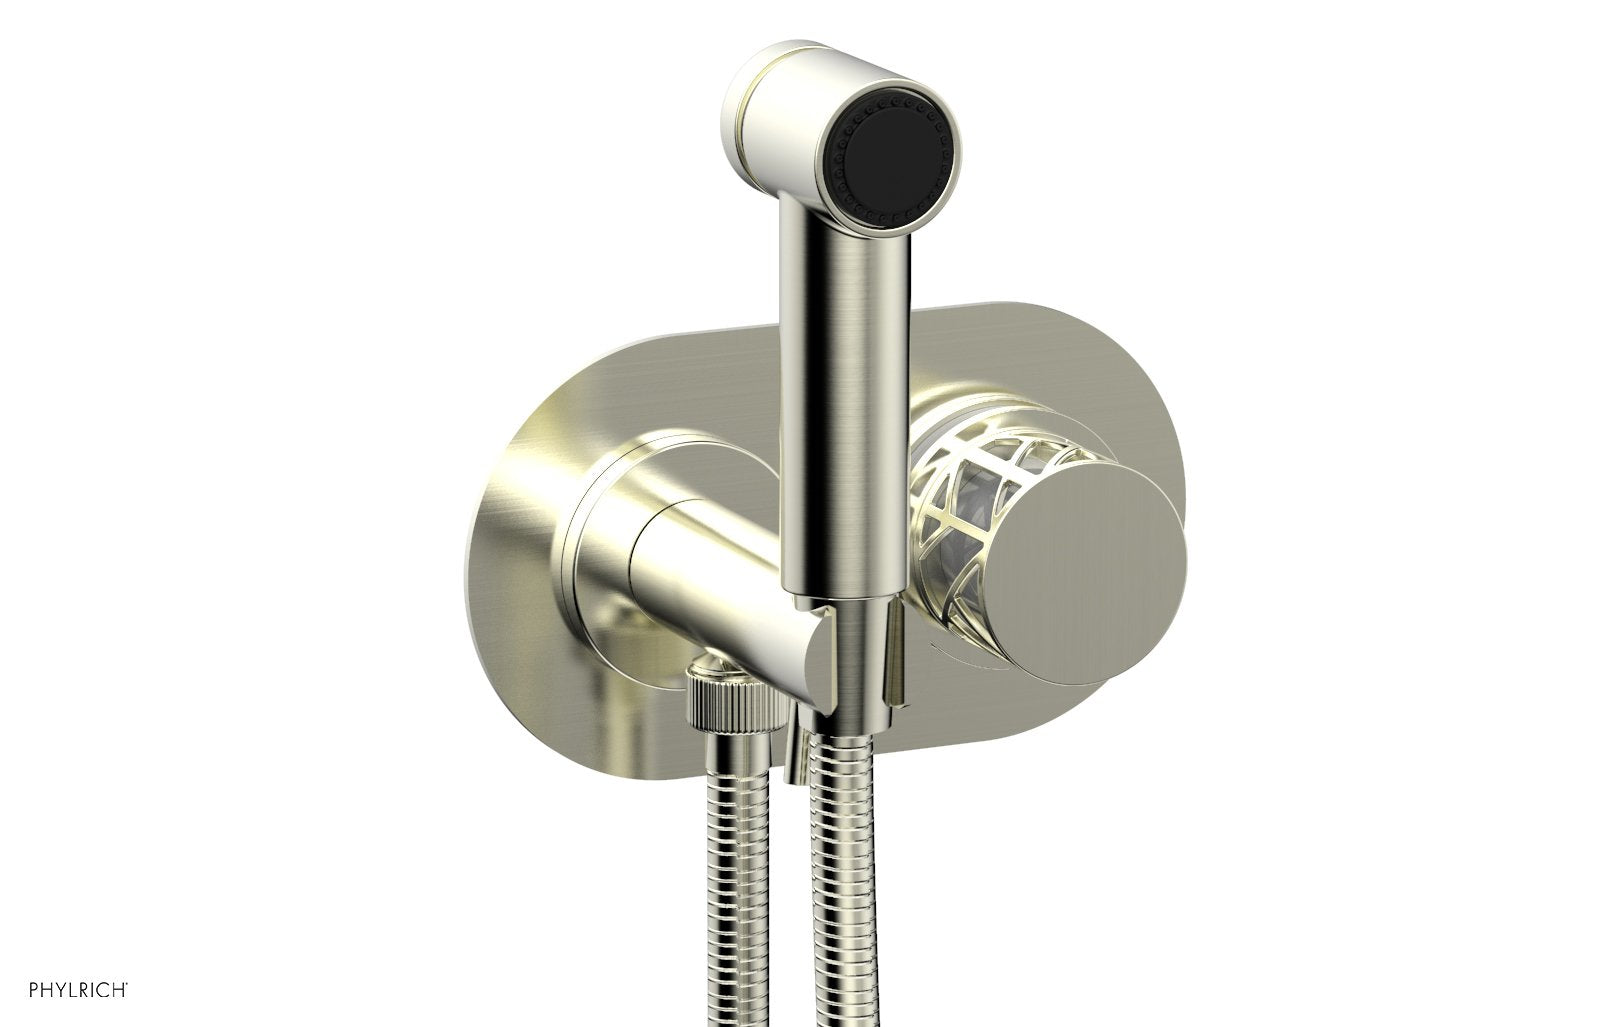 Phylrich JOLIE Wall Mounted Bidet, Round Handle with "White" Accents